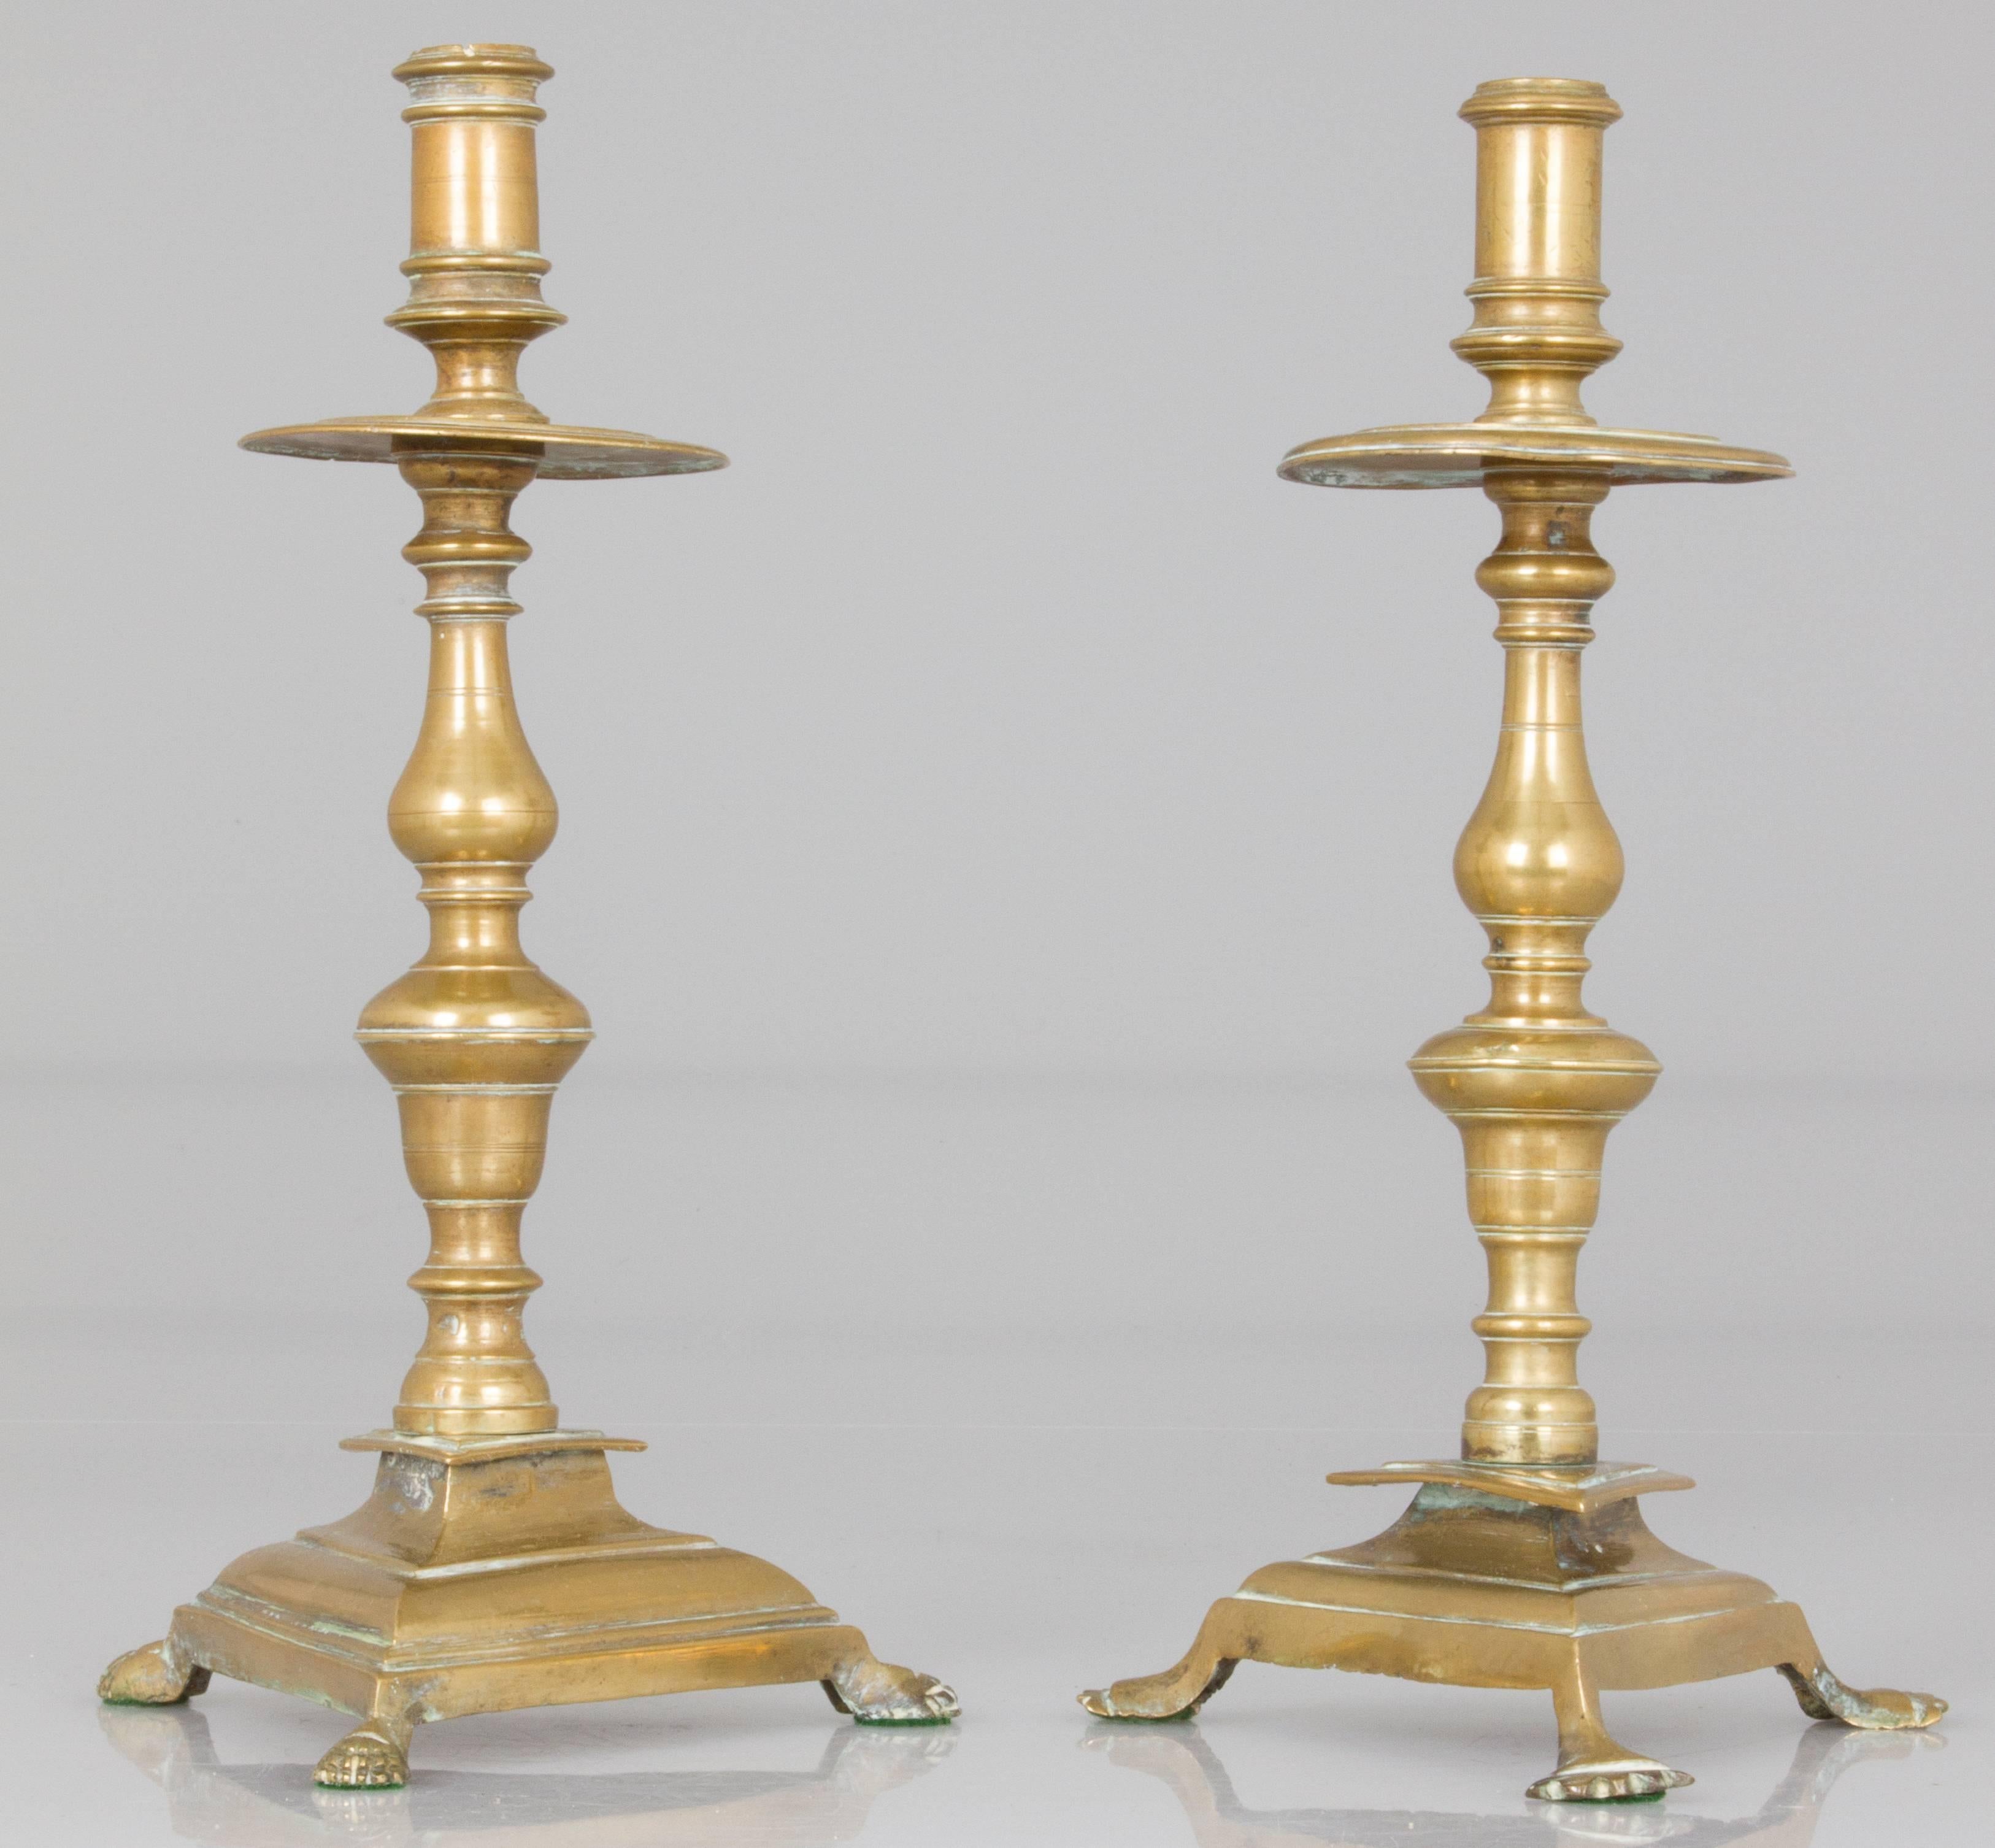 These are two pairs of similar antique English candlesticks.